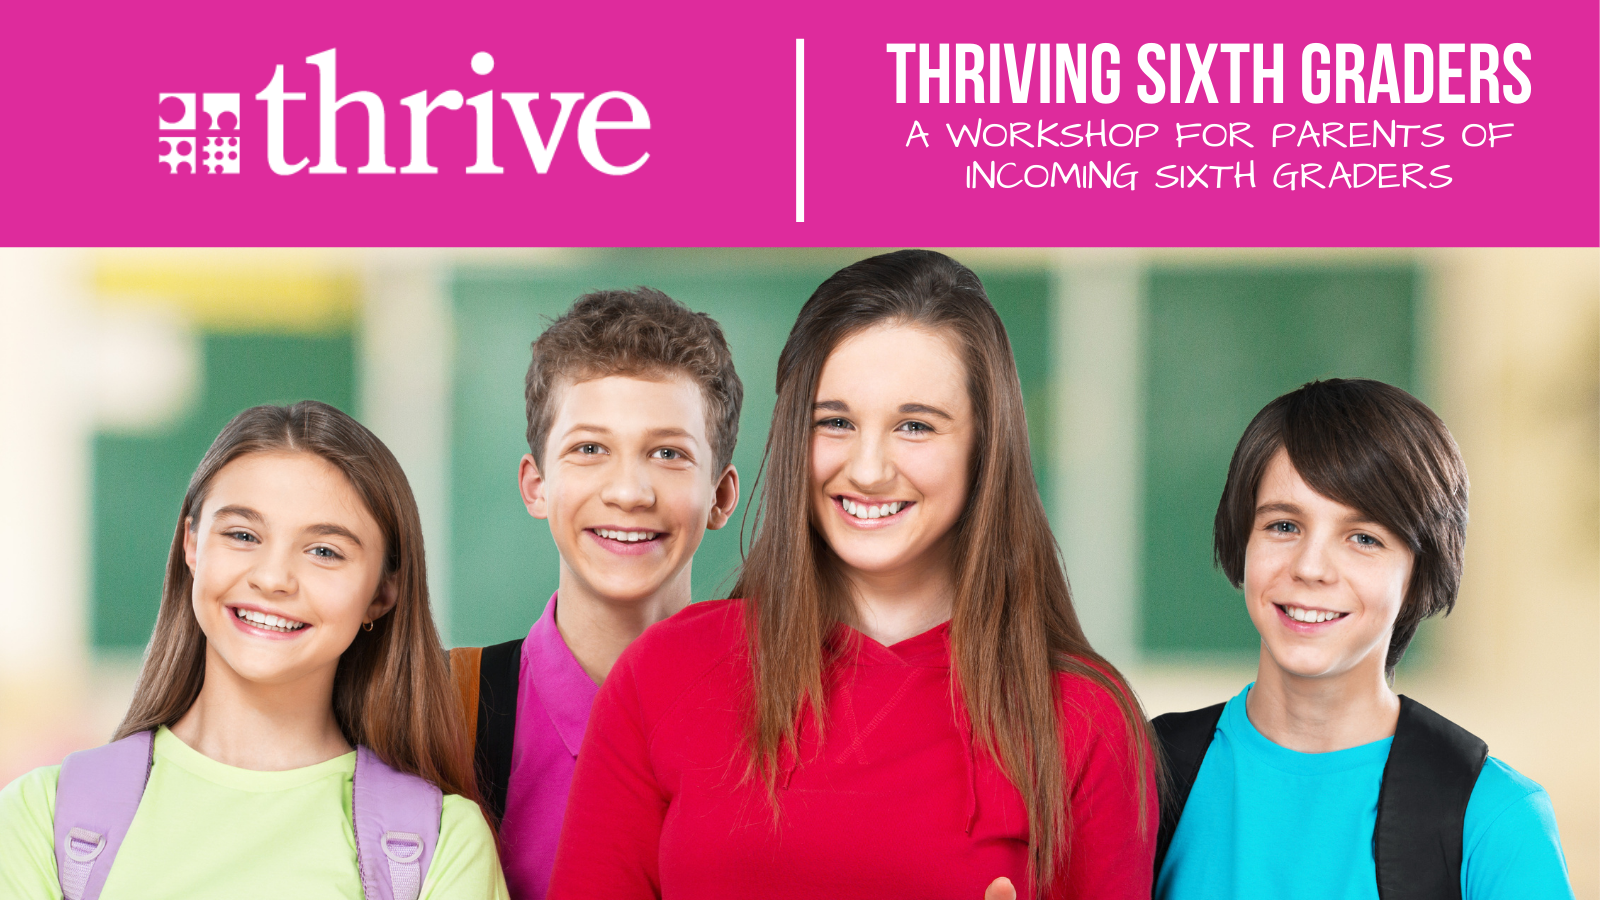 Thriving Sixth Graders: A Workshop for Parents of Incoming 6th Graders